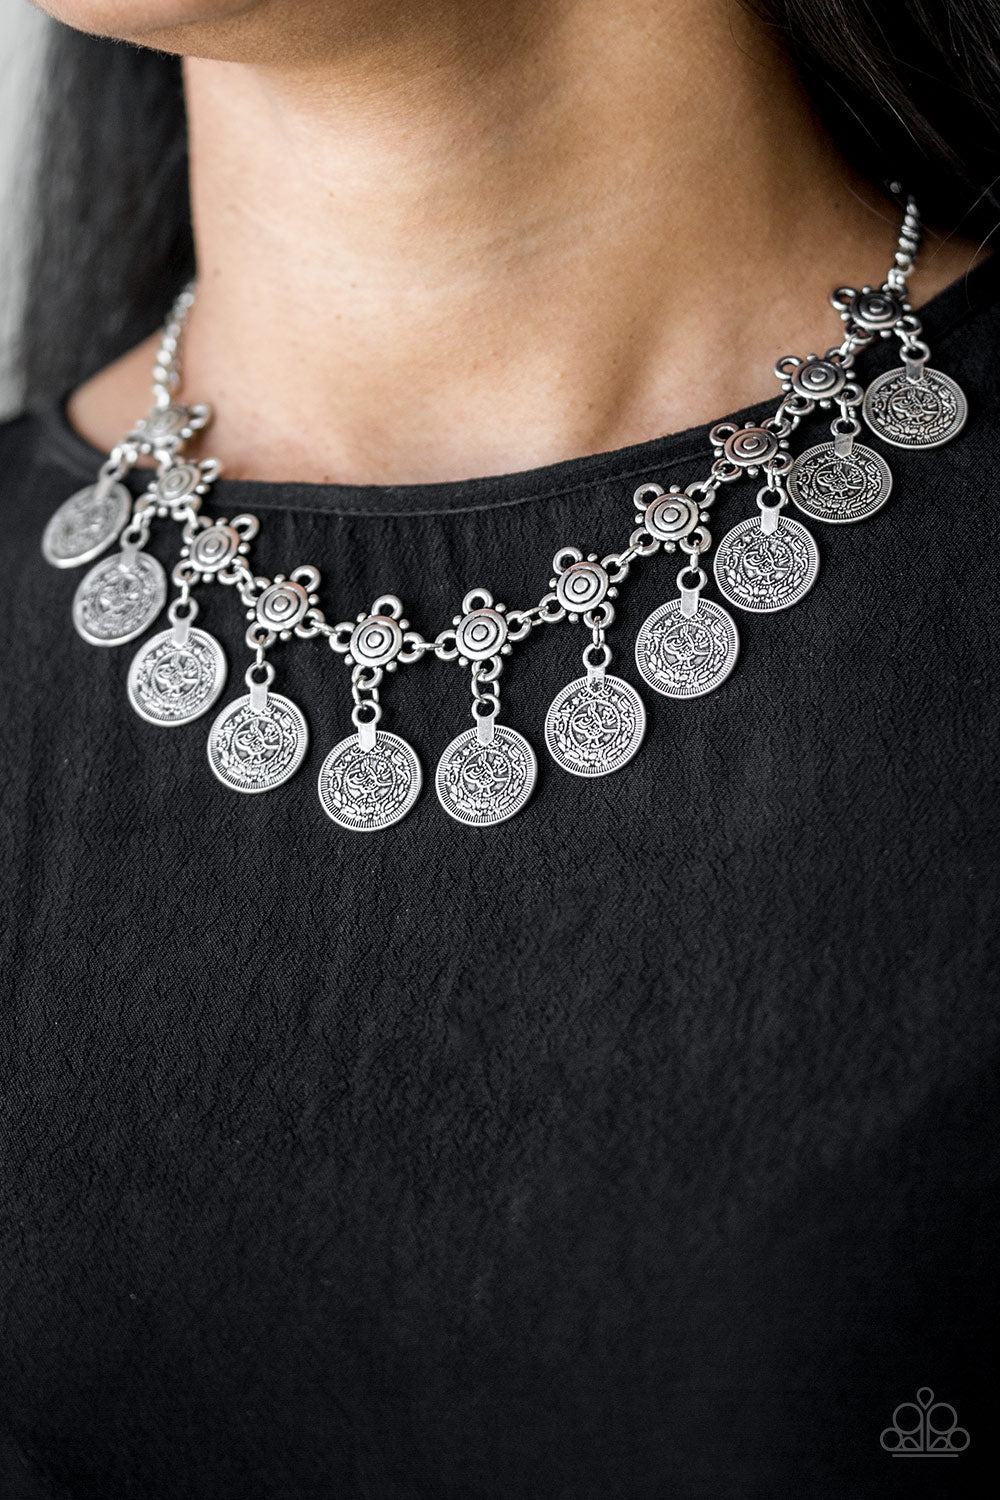 Walk The Plank - Silver Fashion Necklace - Paparazzi Accessories - Coin-like discs swing from the bottoms of ornate silver frames, creating a boisterous fringe below the collar. Features an adjustable clasp closure. Sold as one individual fashion necklace.